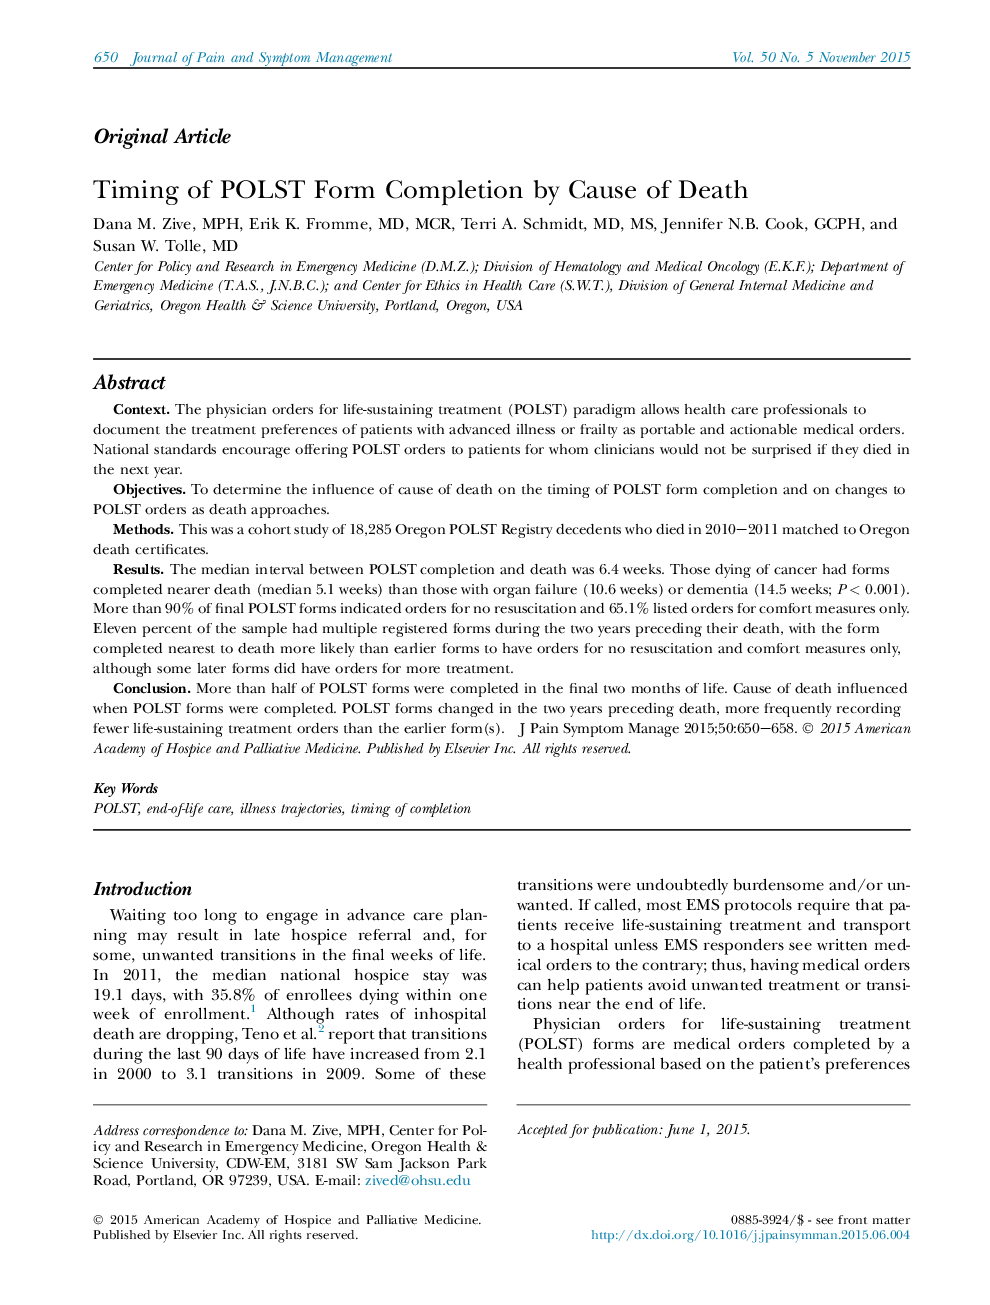 Original ArticleTiming of POLST Form Completion by Cause of Death